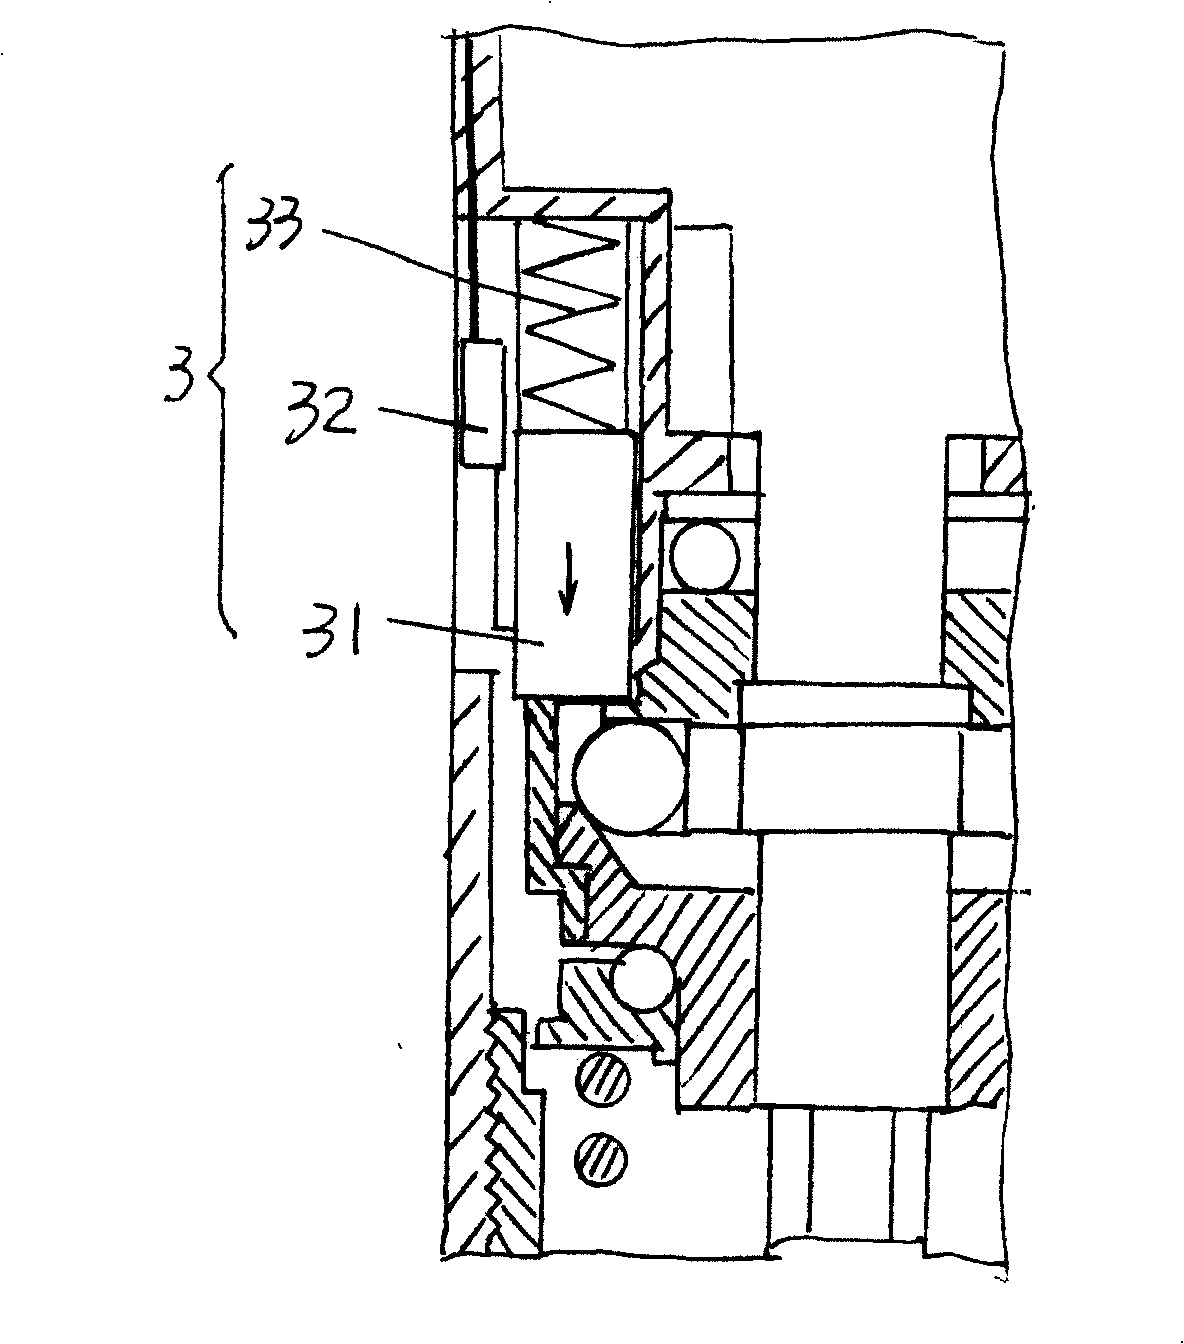 Structure of electric screwdriver arrested by non-contact electromagnetic induction